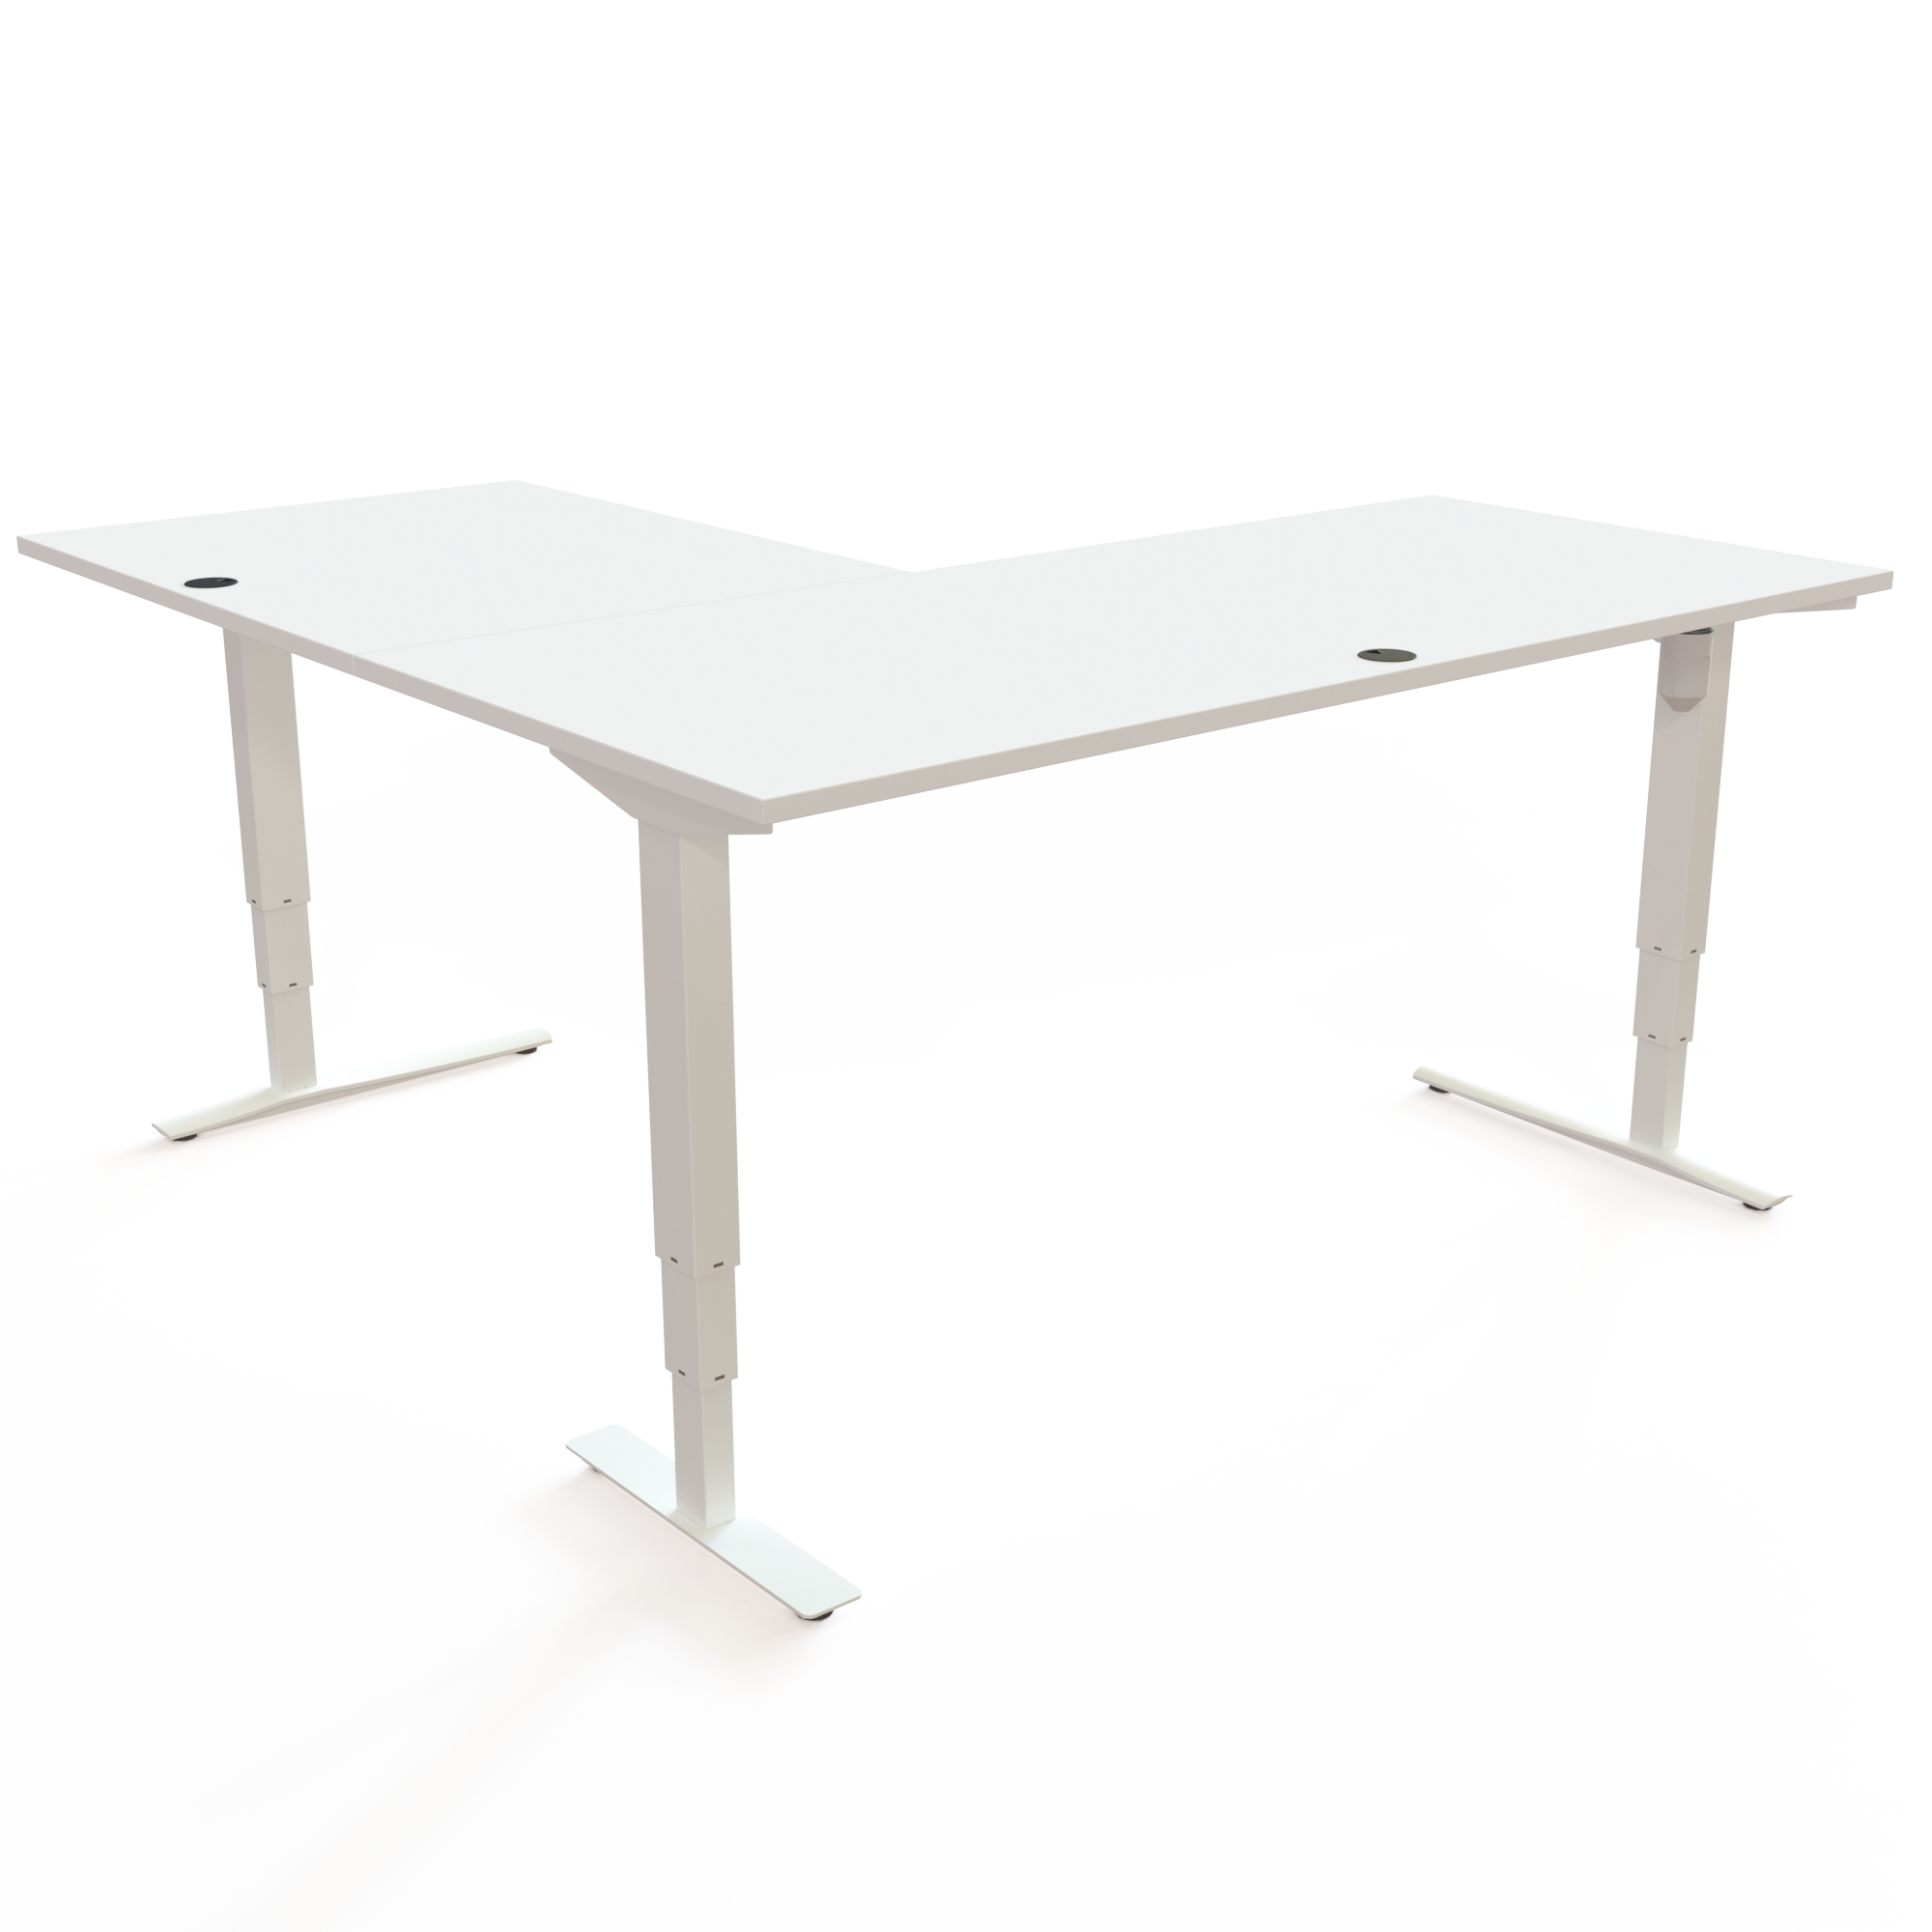 Electric Adjustable Desk | 180x180 cm | White with white frame